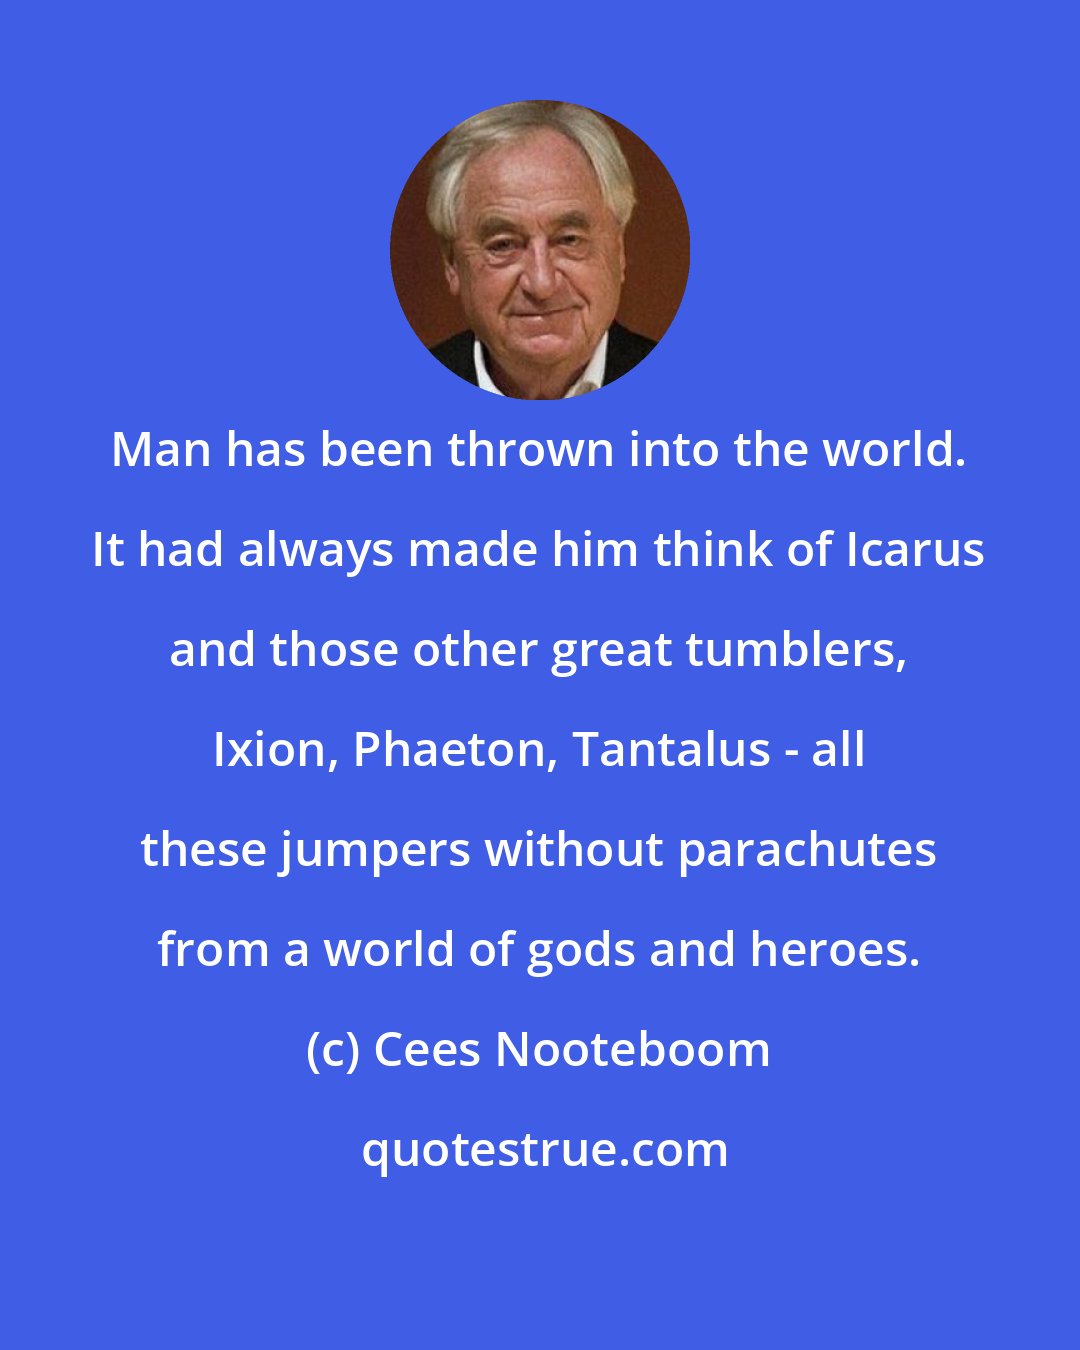 Cees Nooteboom: Man has been thrown into the world. It had always made him think of Icarus and those other great tumblers, Ixion, Phaeton, Tantalus - all these jumpers without parachutes from a world of gods and heroes.